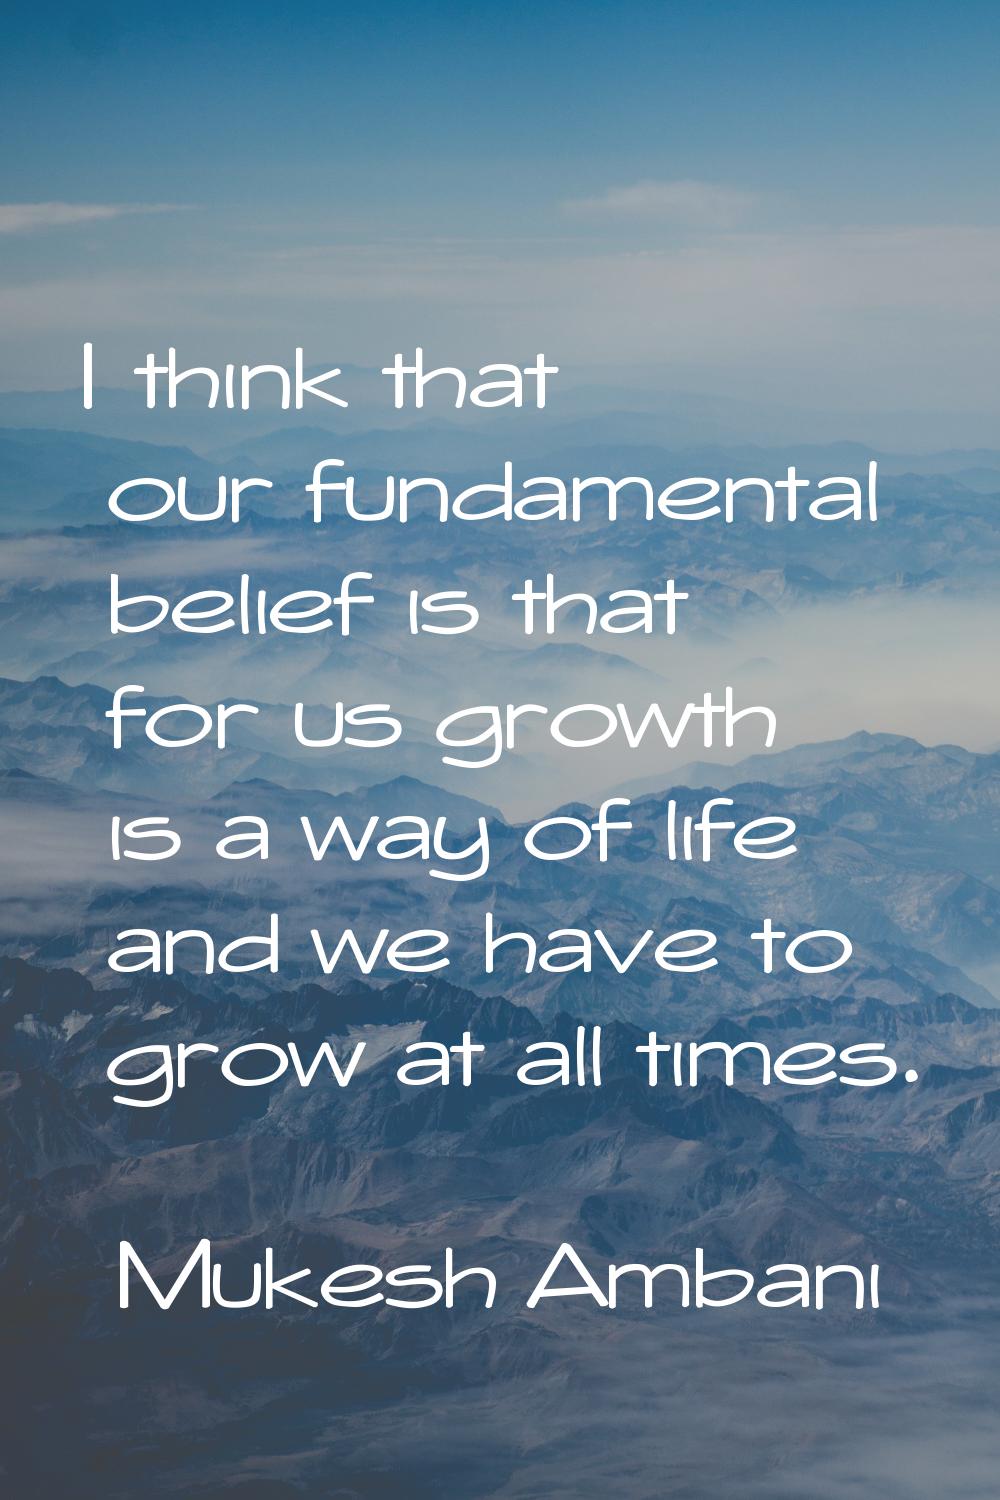 I think that our fundamental belief is that for us growth is a way of life and we have to grow at a